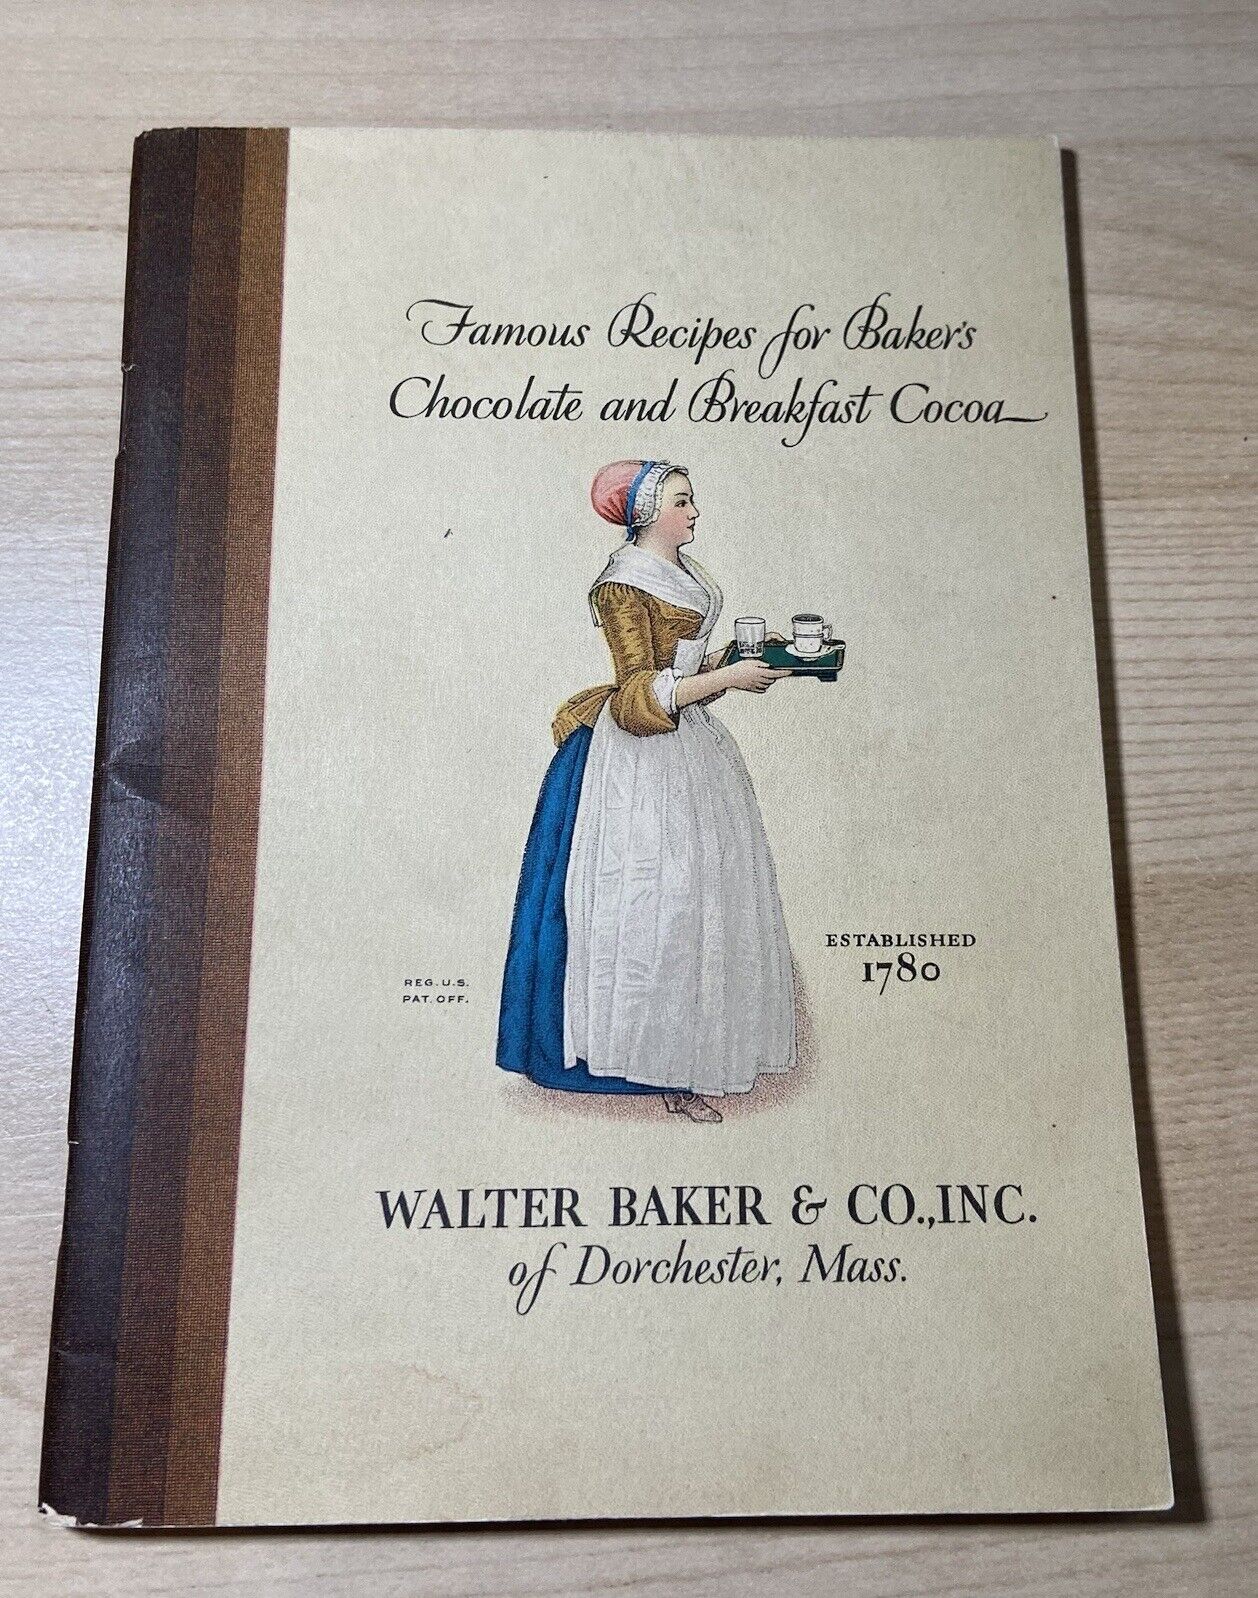 Vintage Walter Baker & Co. Famous Recipes for Bakers Cook Book